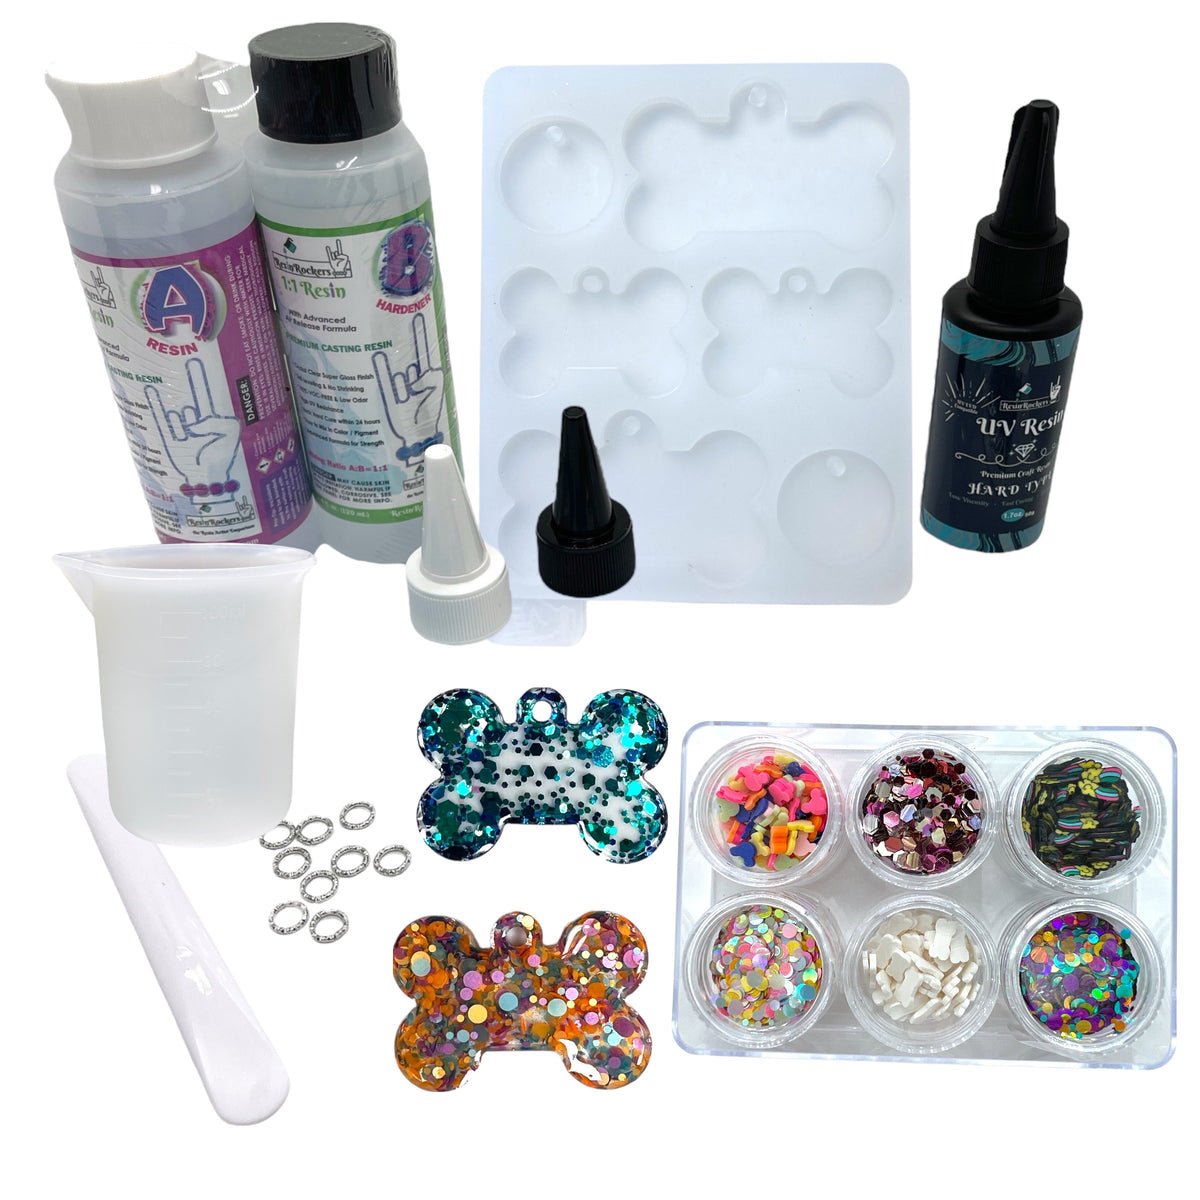 Epoxy Resin Set For Beginners UV Light Crystal Clear Mold Starter DIY Kit  Jewelry Making Mold Craft For Starter Making Access